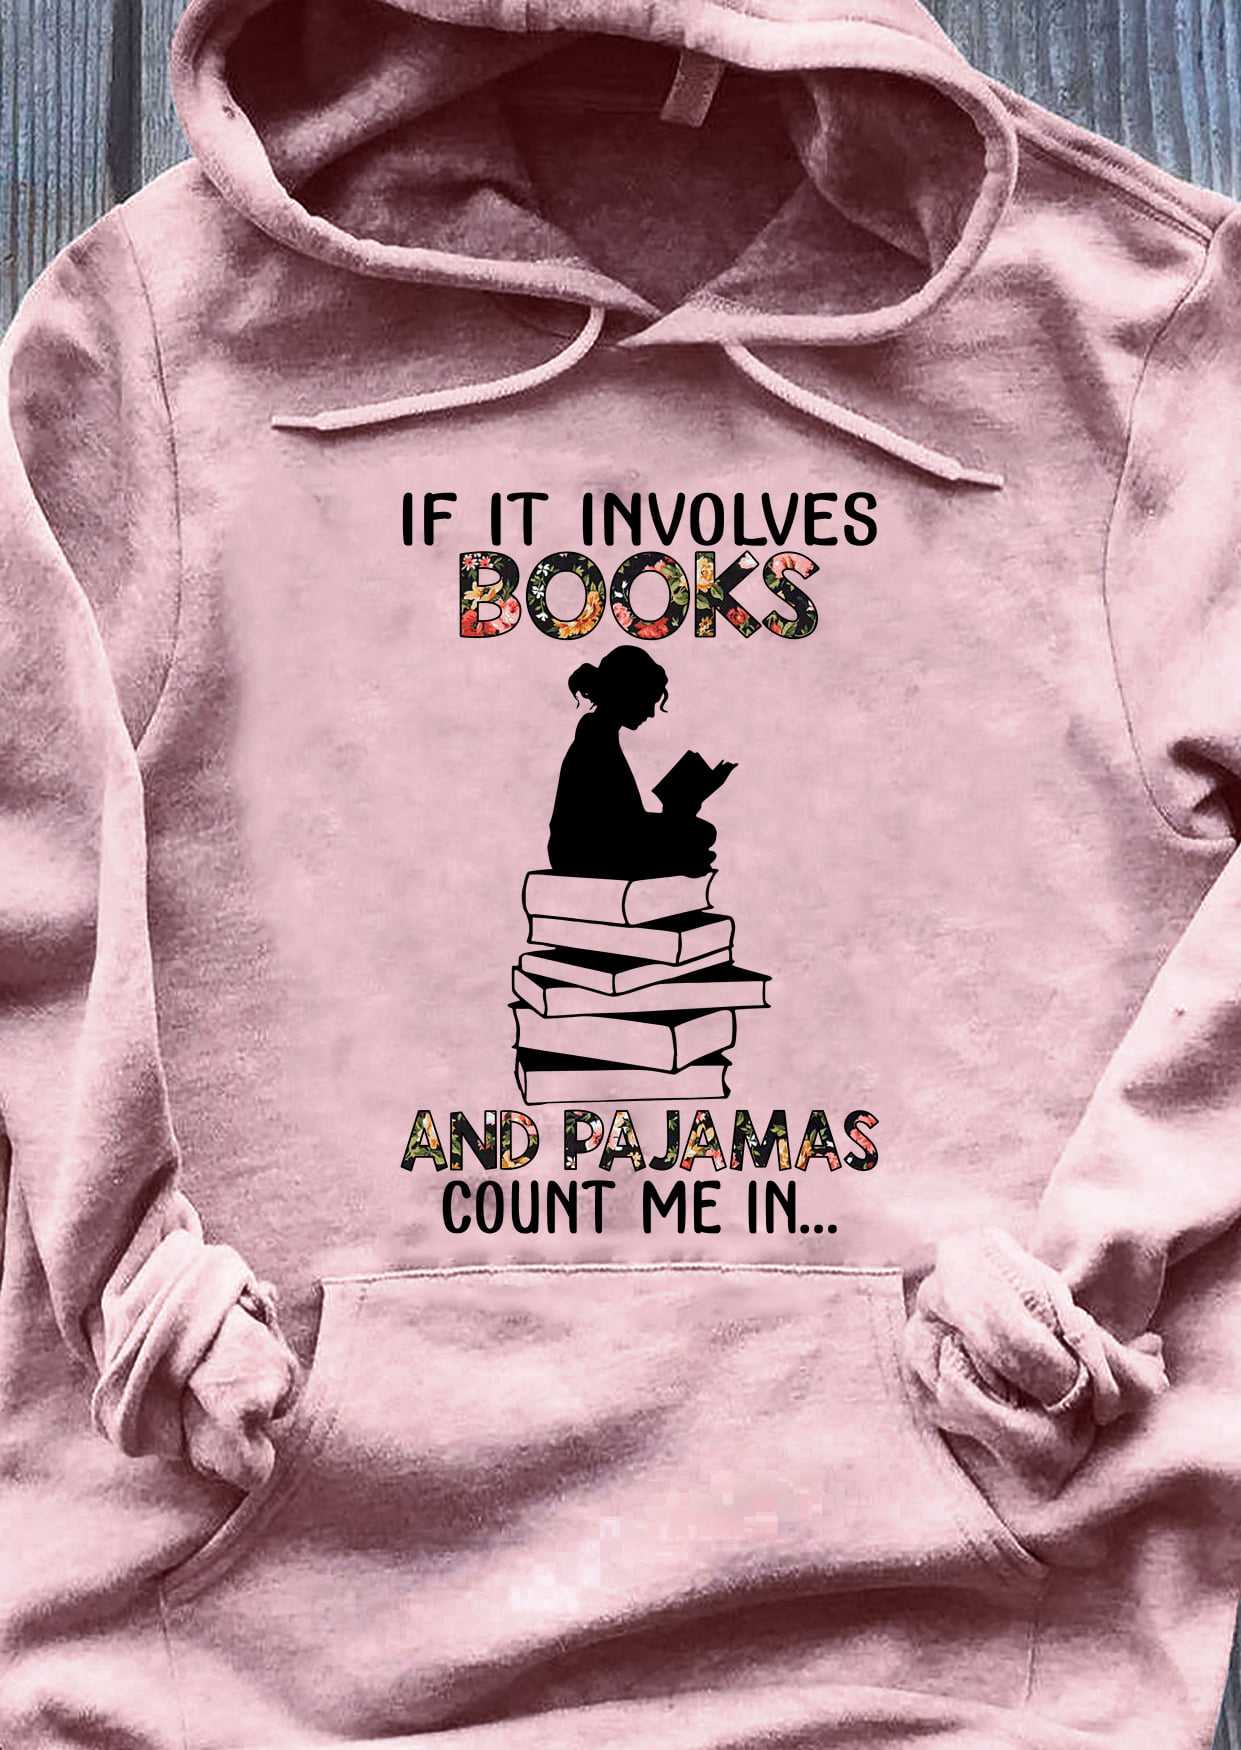 Girl Love Book - If it involves books and pajamas count me in